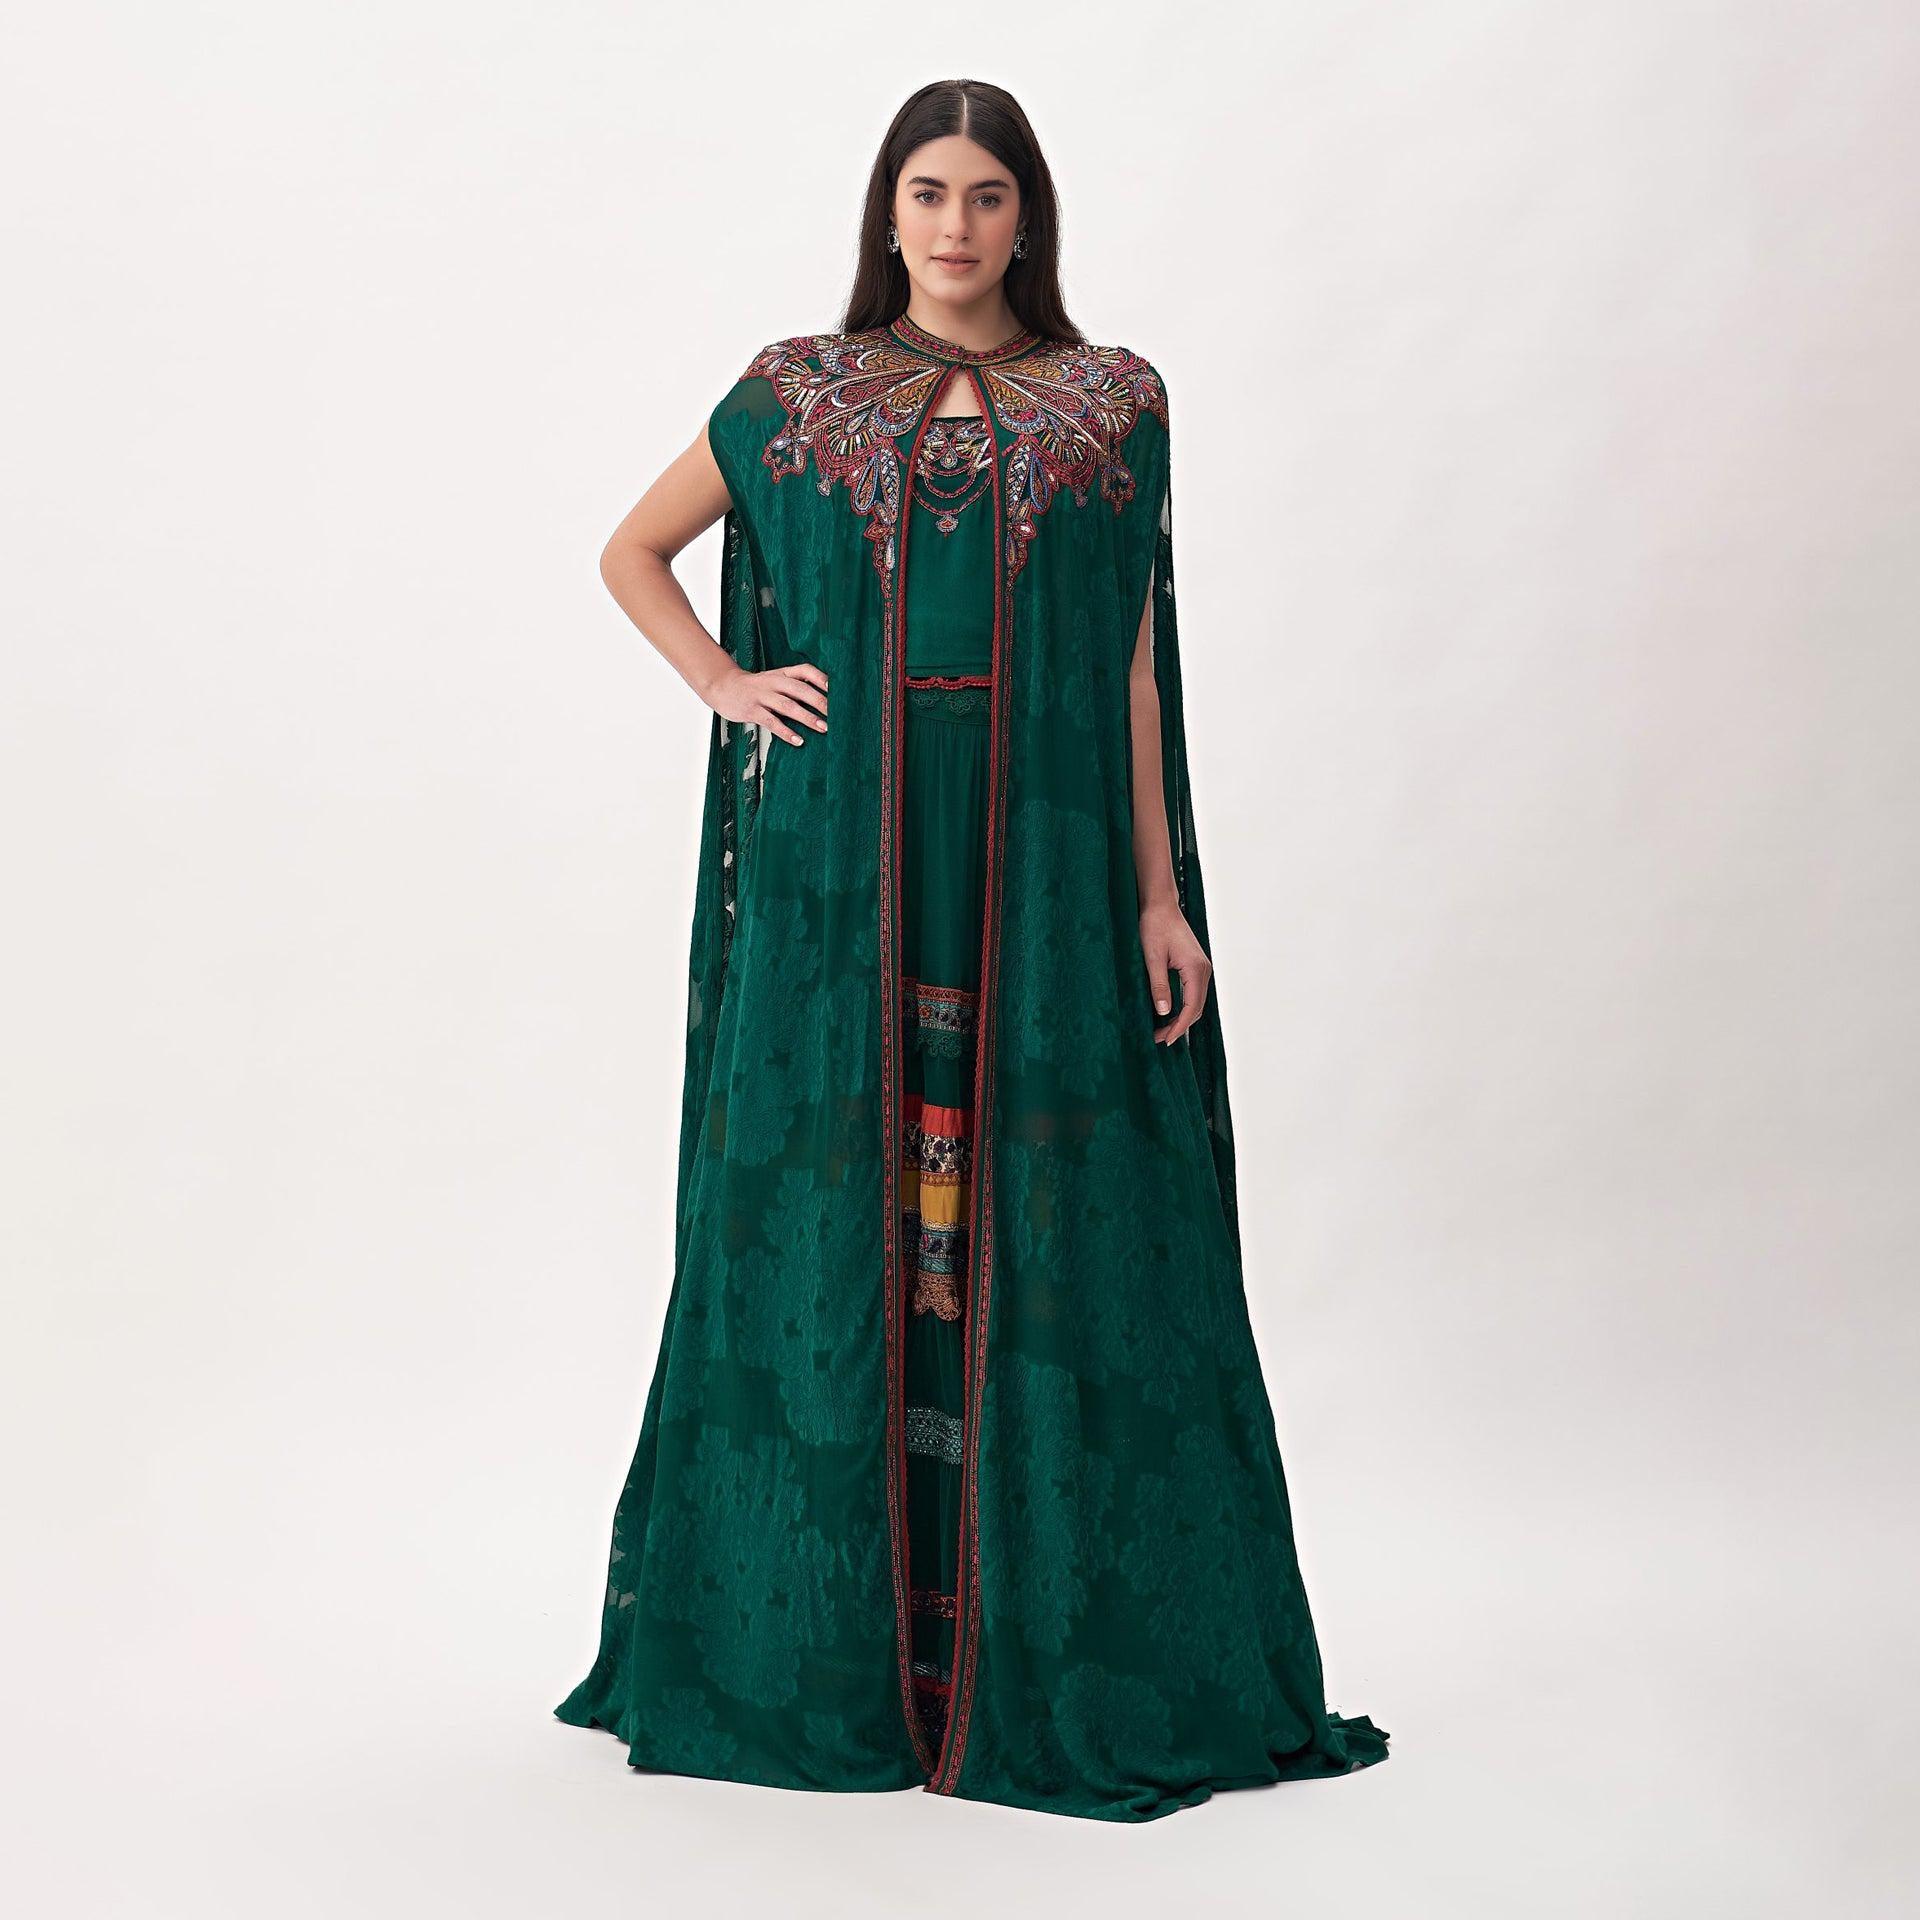 Green Embroidery Sleeveless Rustella Dress With Cape From Shalky - WECRE8